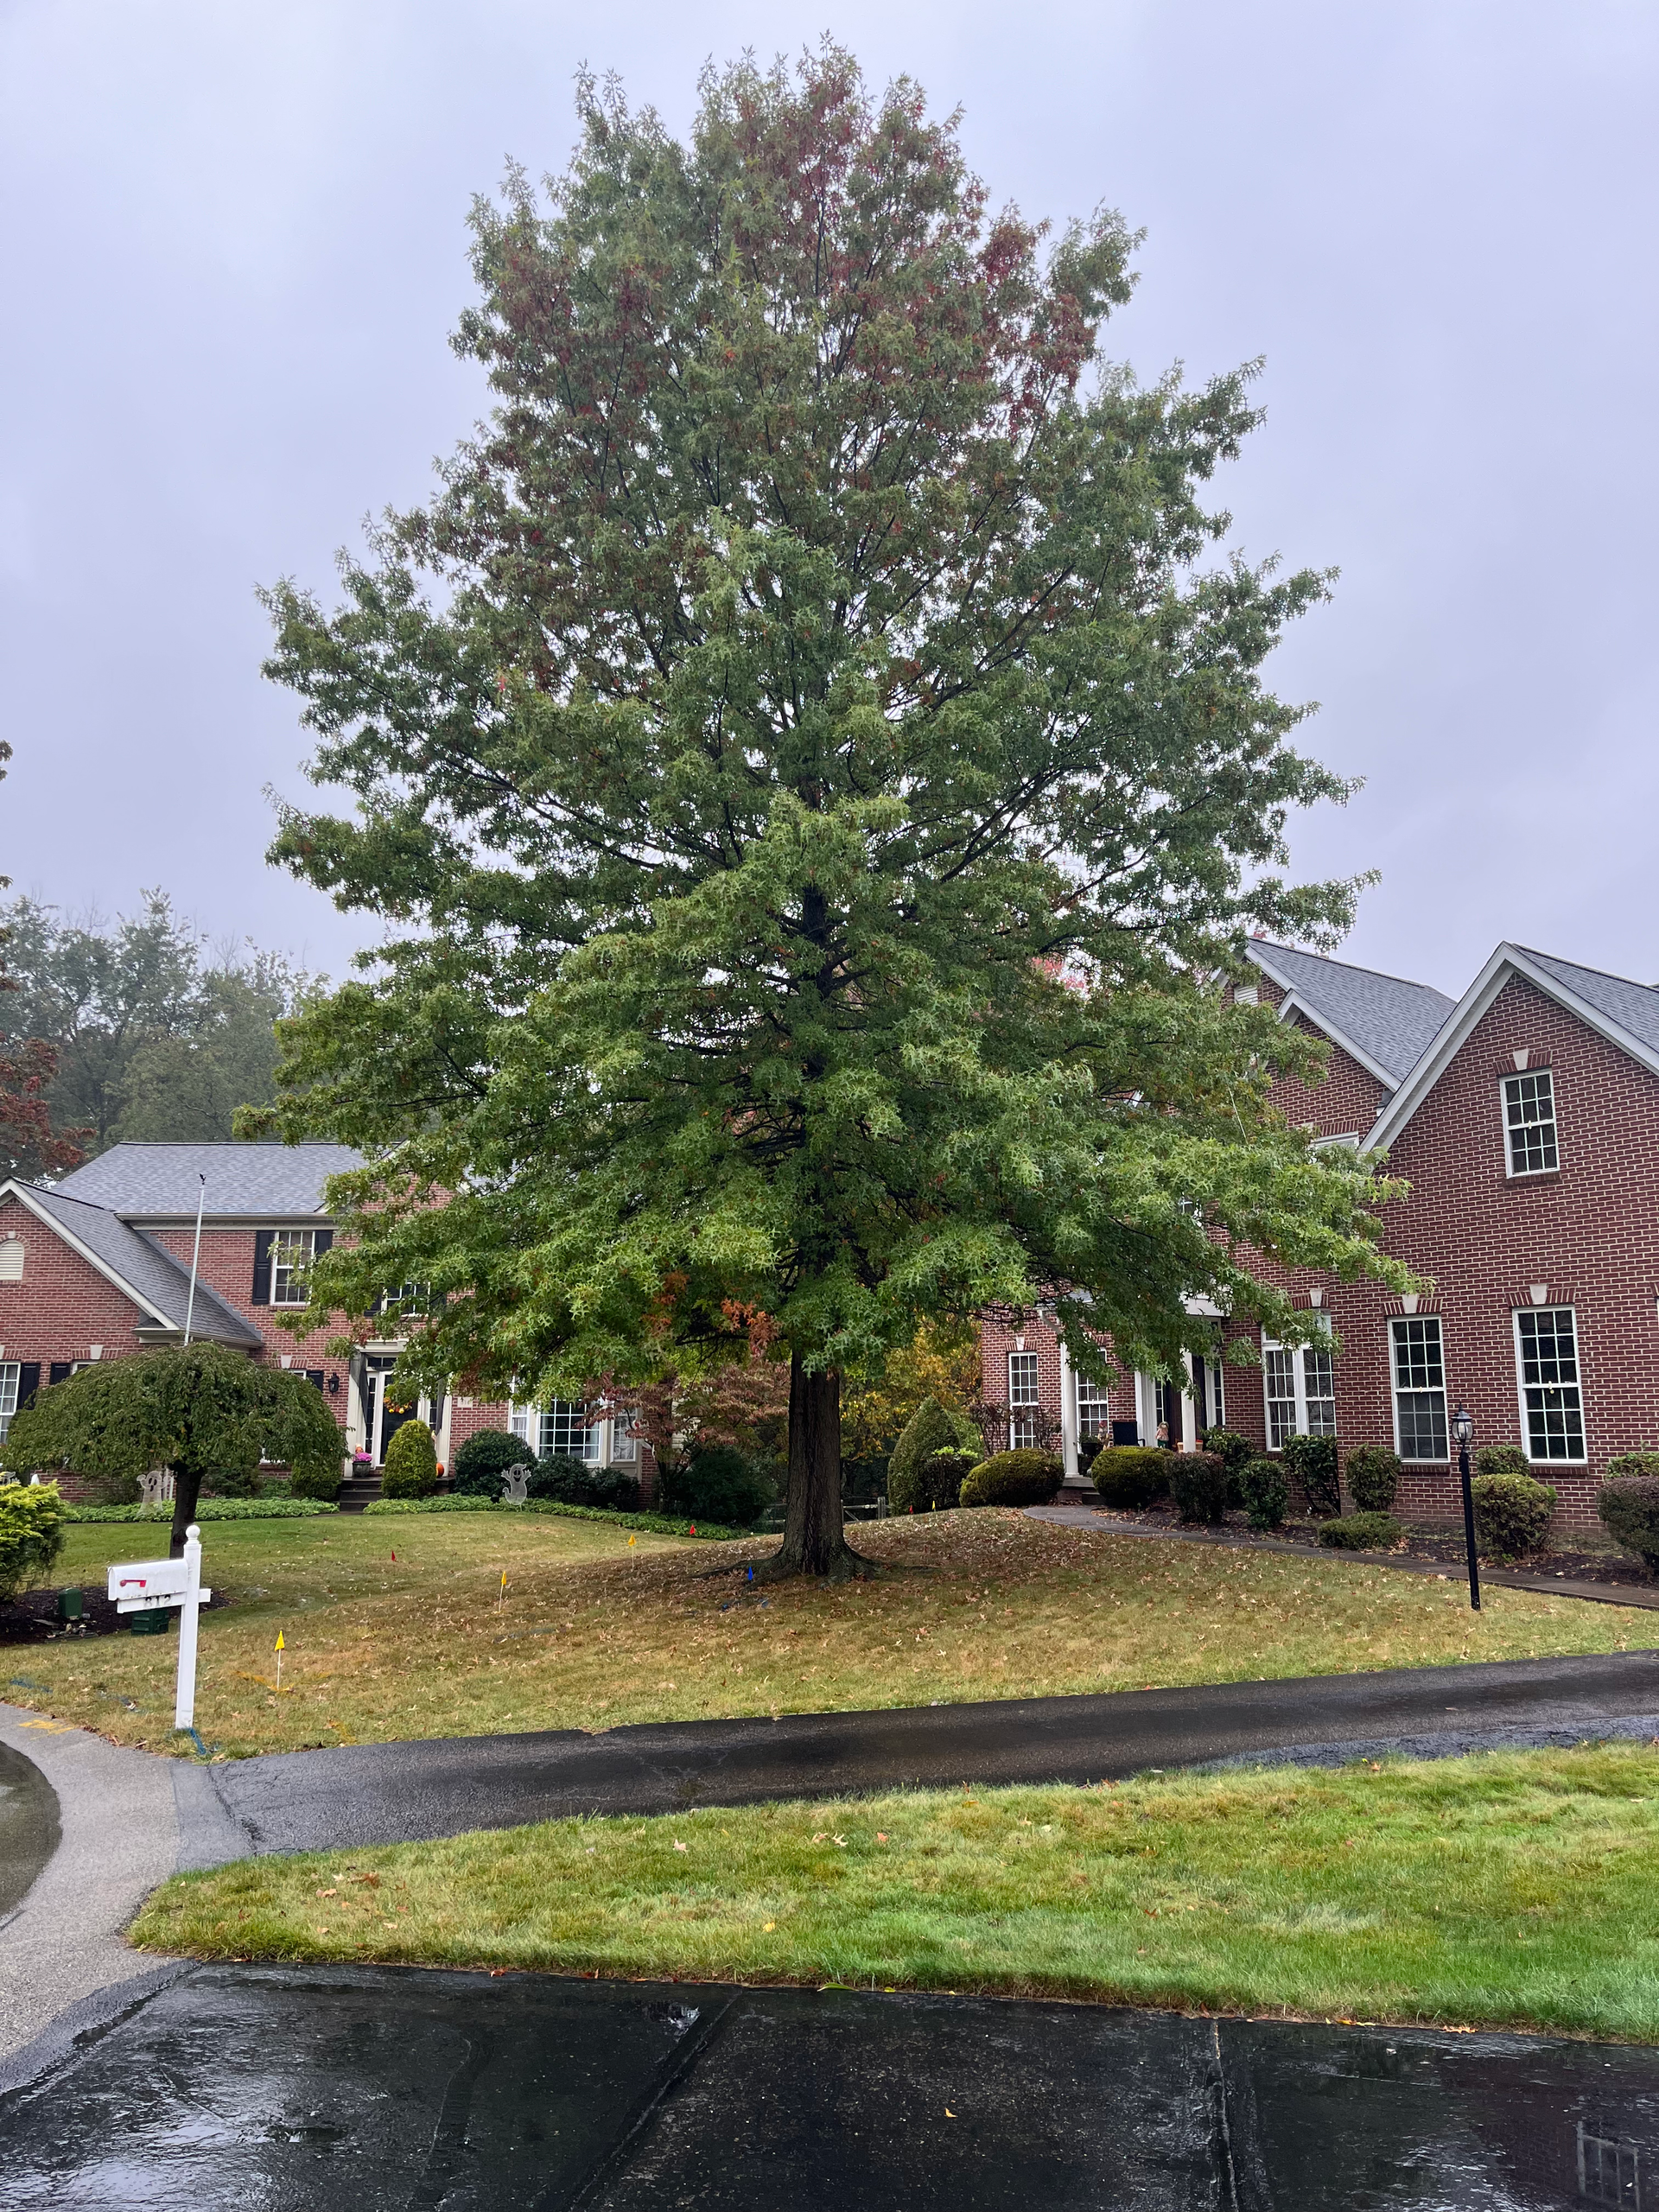 a large tree is in the middle of a lush green yard in front of a brick house .